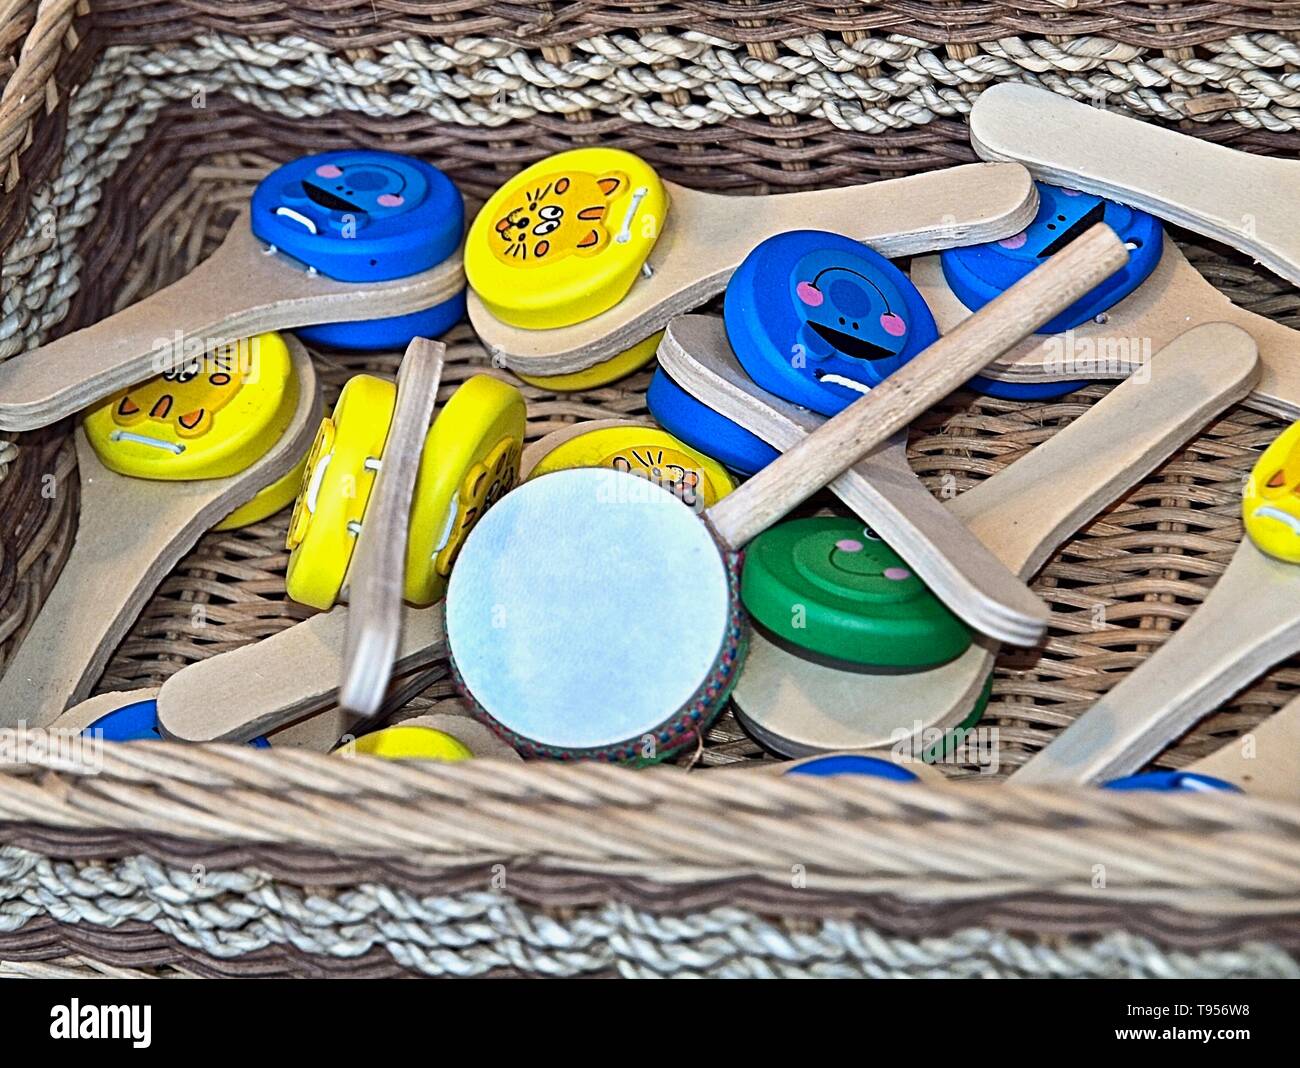 Colorful wooden music instruments for children at a market Stock Photo